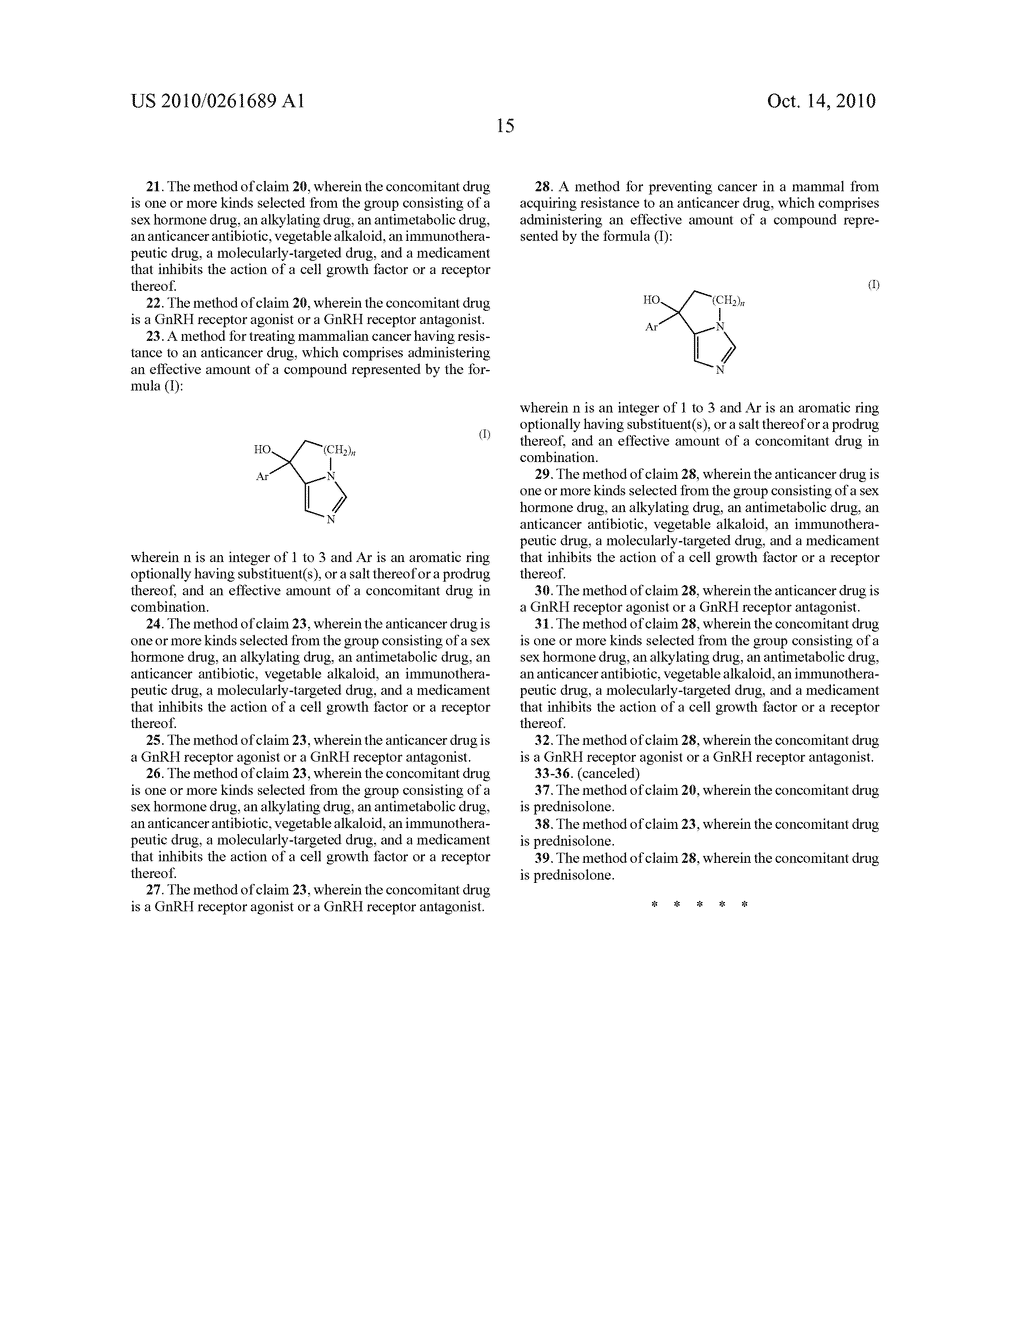 PYRROLO [1,2-C] IMIDAZOLE DERIVATIVES FOR USE IN THE PROPHYLAXIS OR TREATMENT OF CANCER WHICH IS REFRACTORY TO KNOWN CANCER THERAPIES - diagram, schematic, and image 18